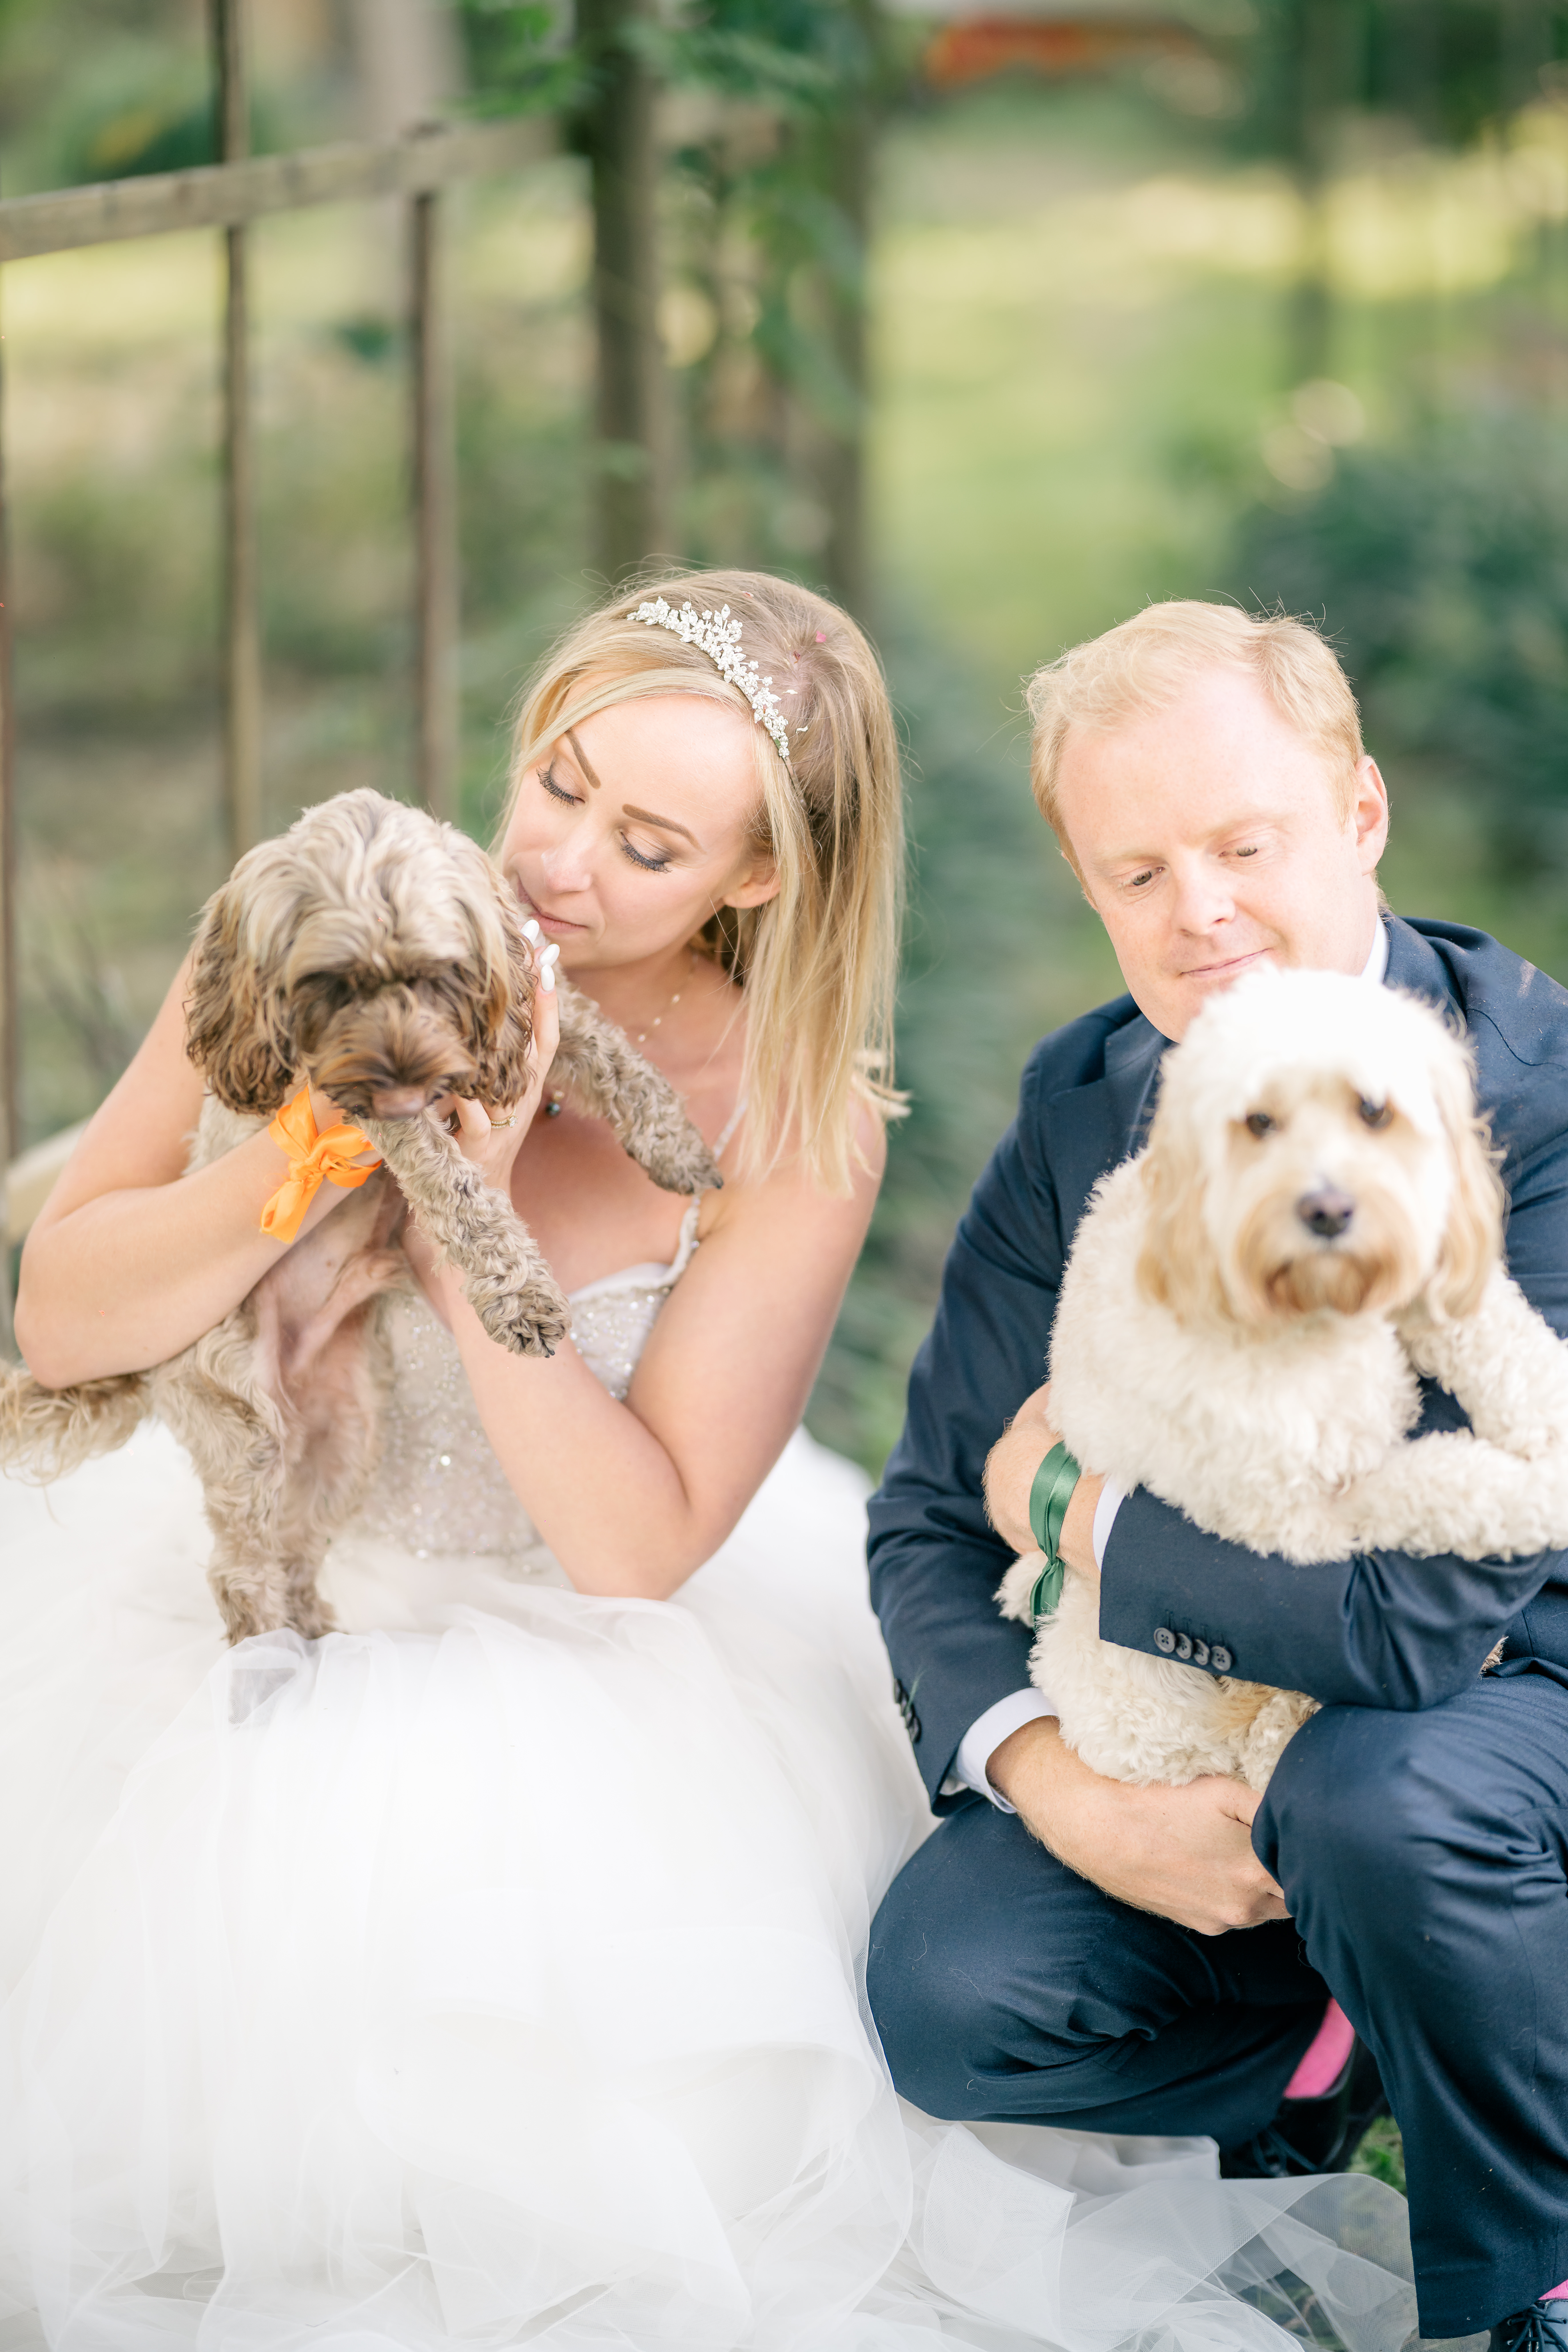 A bride and groom crouch to pet their puppy ring bearers in front of a green garden archway